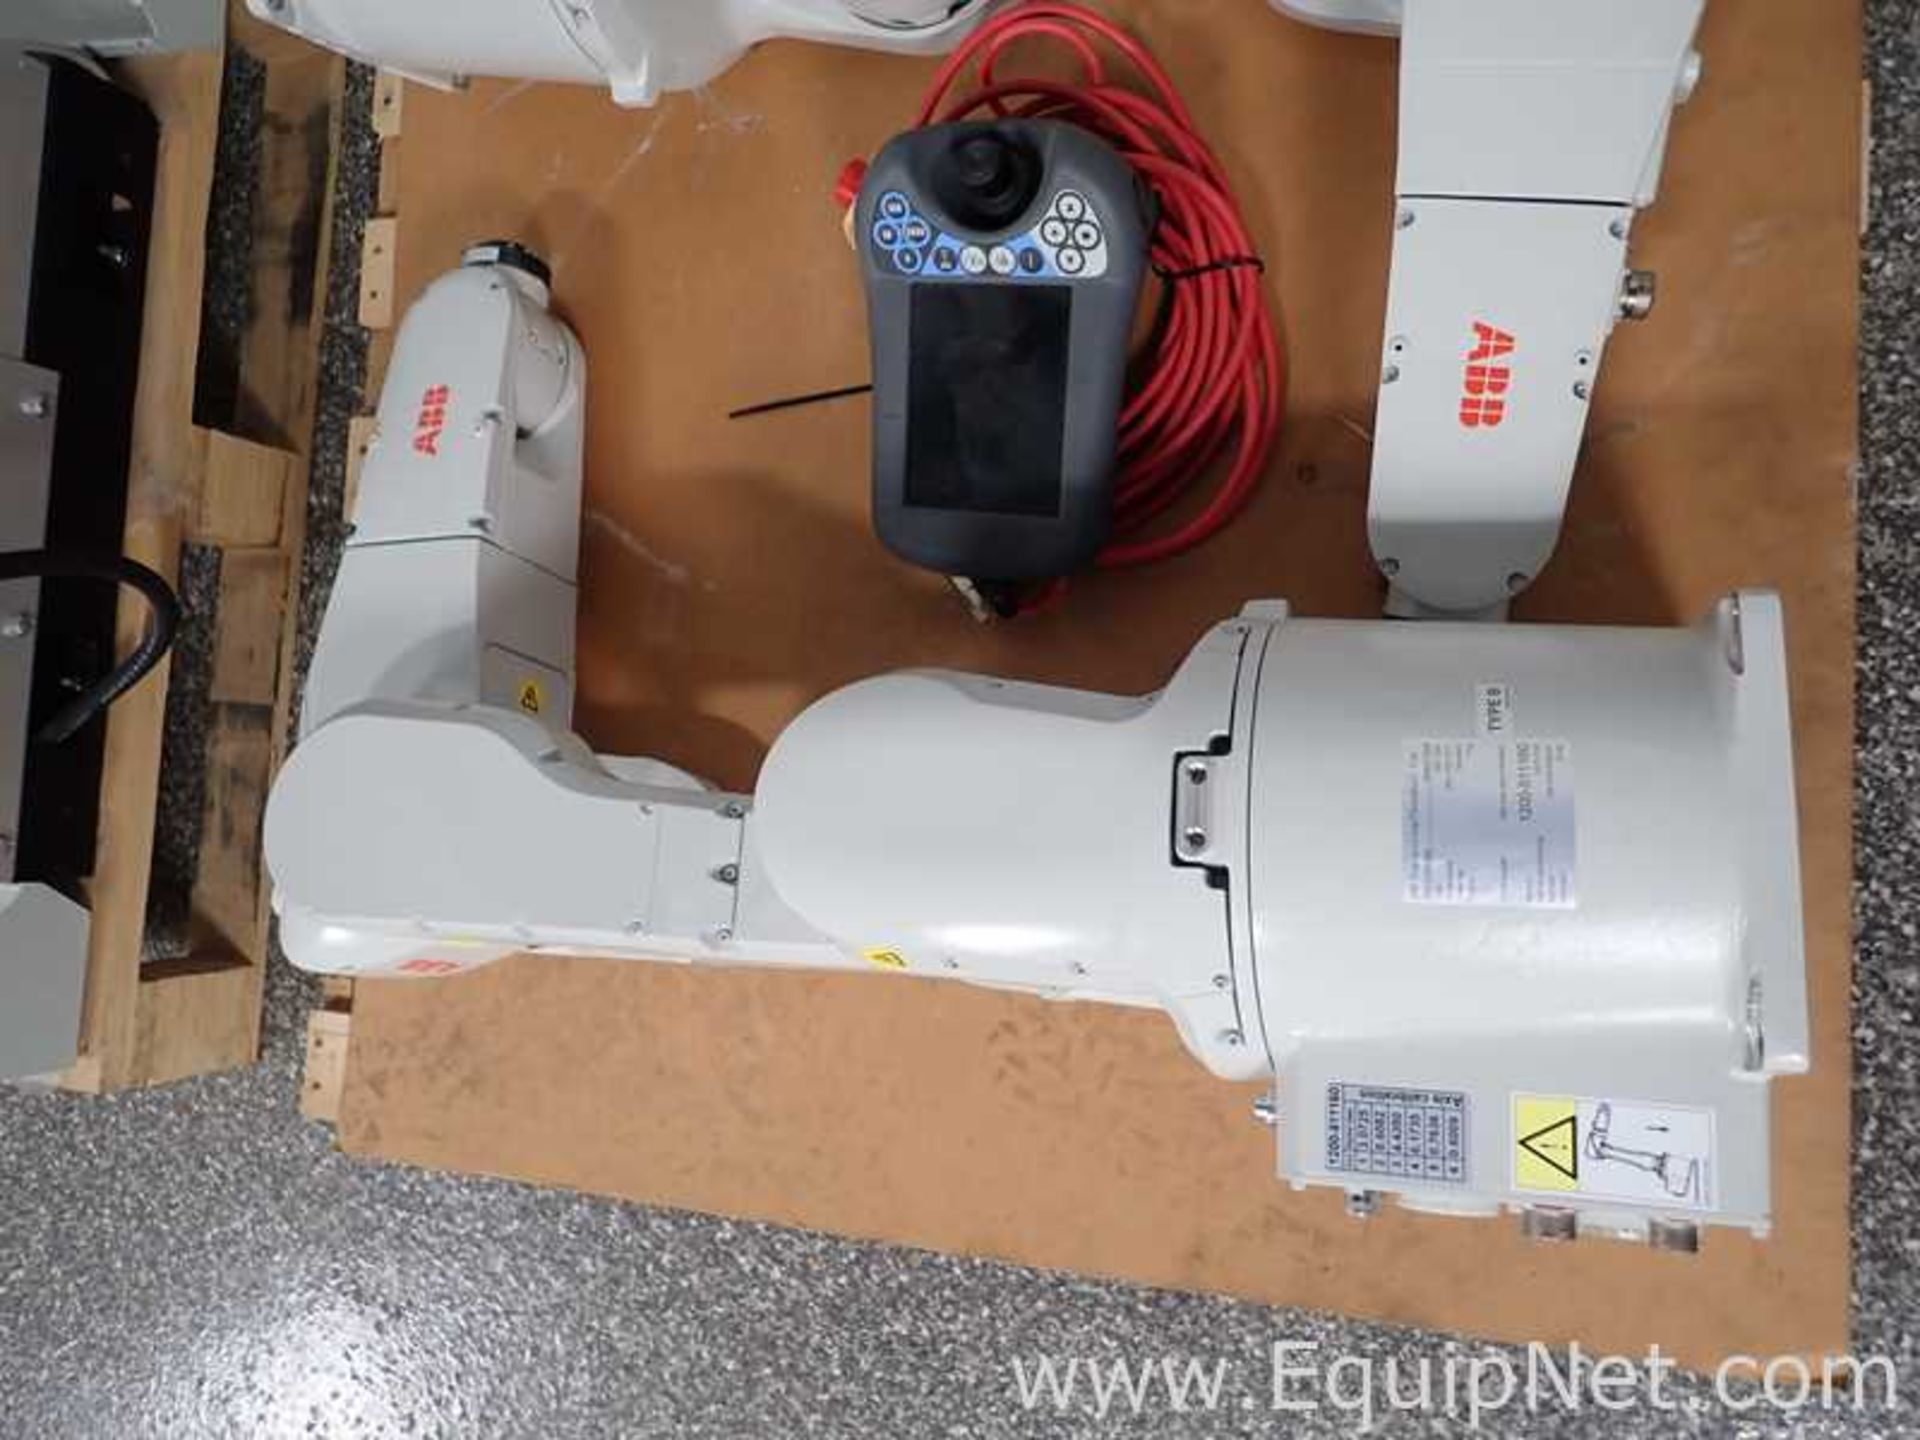 Lot of 2 ABB IRB 1200 Robotic Arms with IRC5 Industrial Controllers - Image 3 of 17